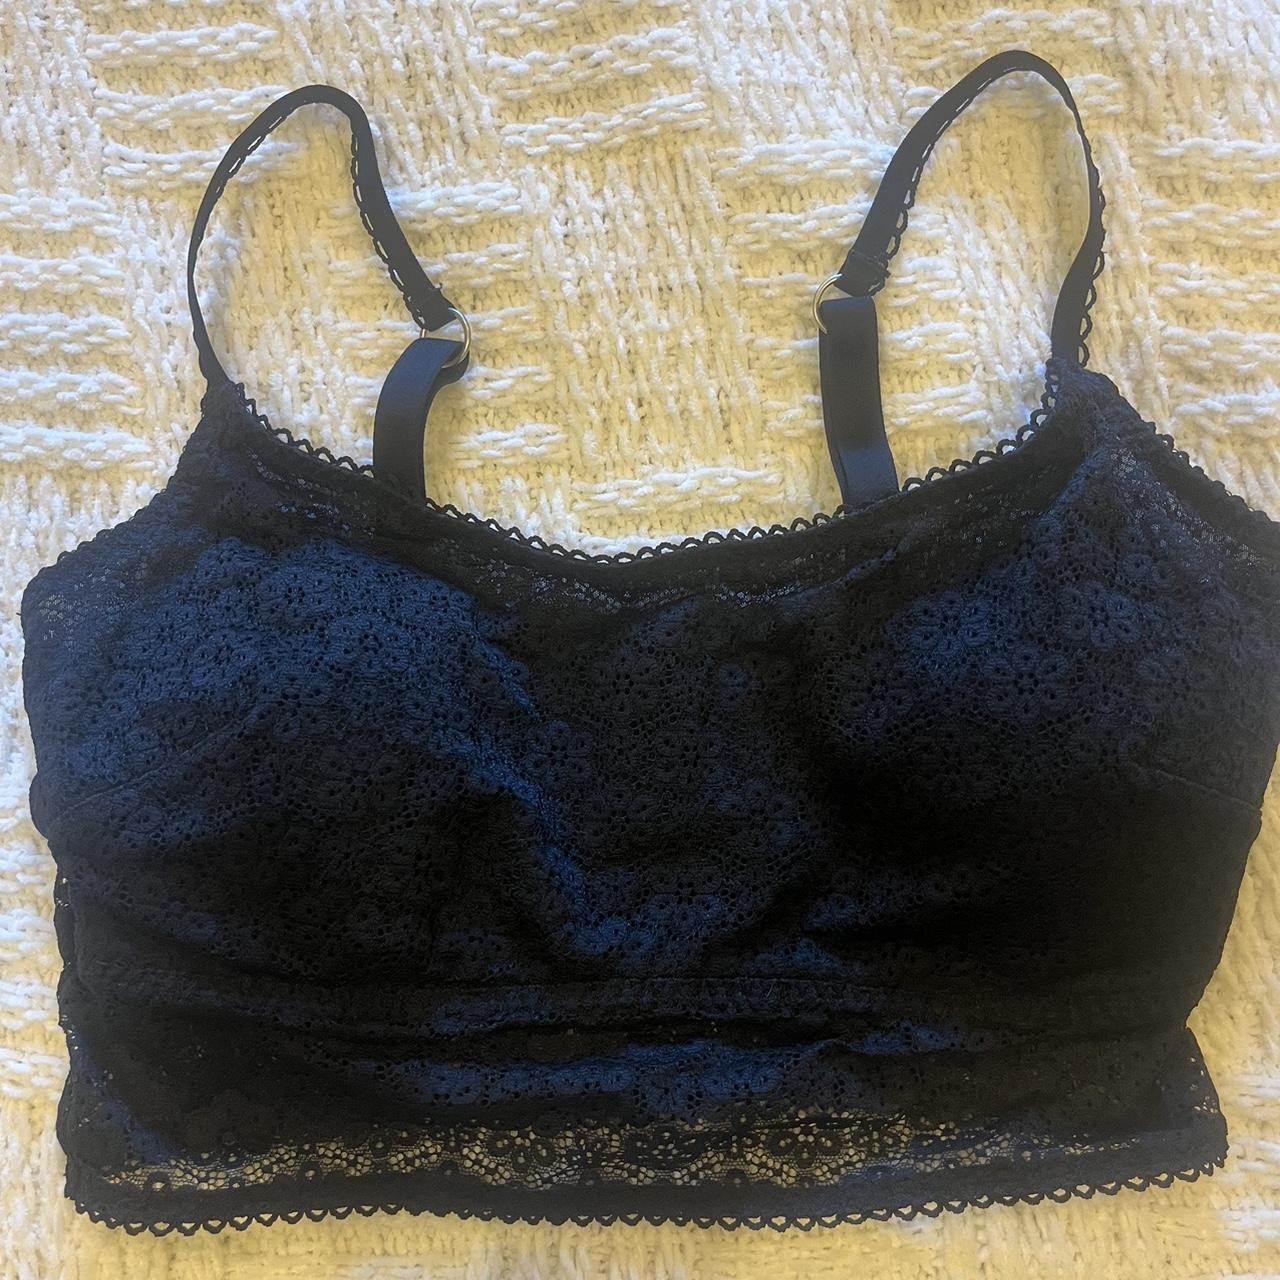 Hollister Black Lace Bralette - $16 - From Shelby